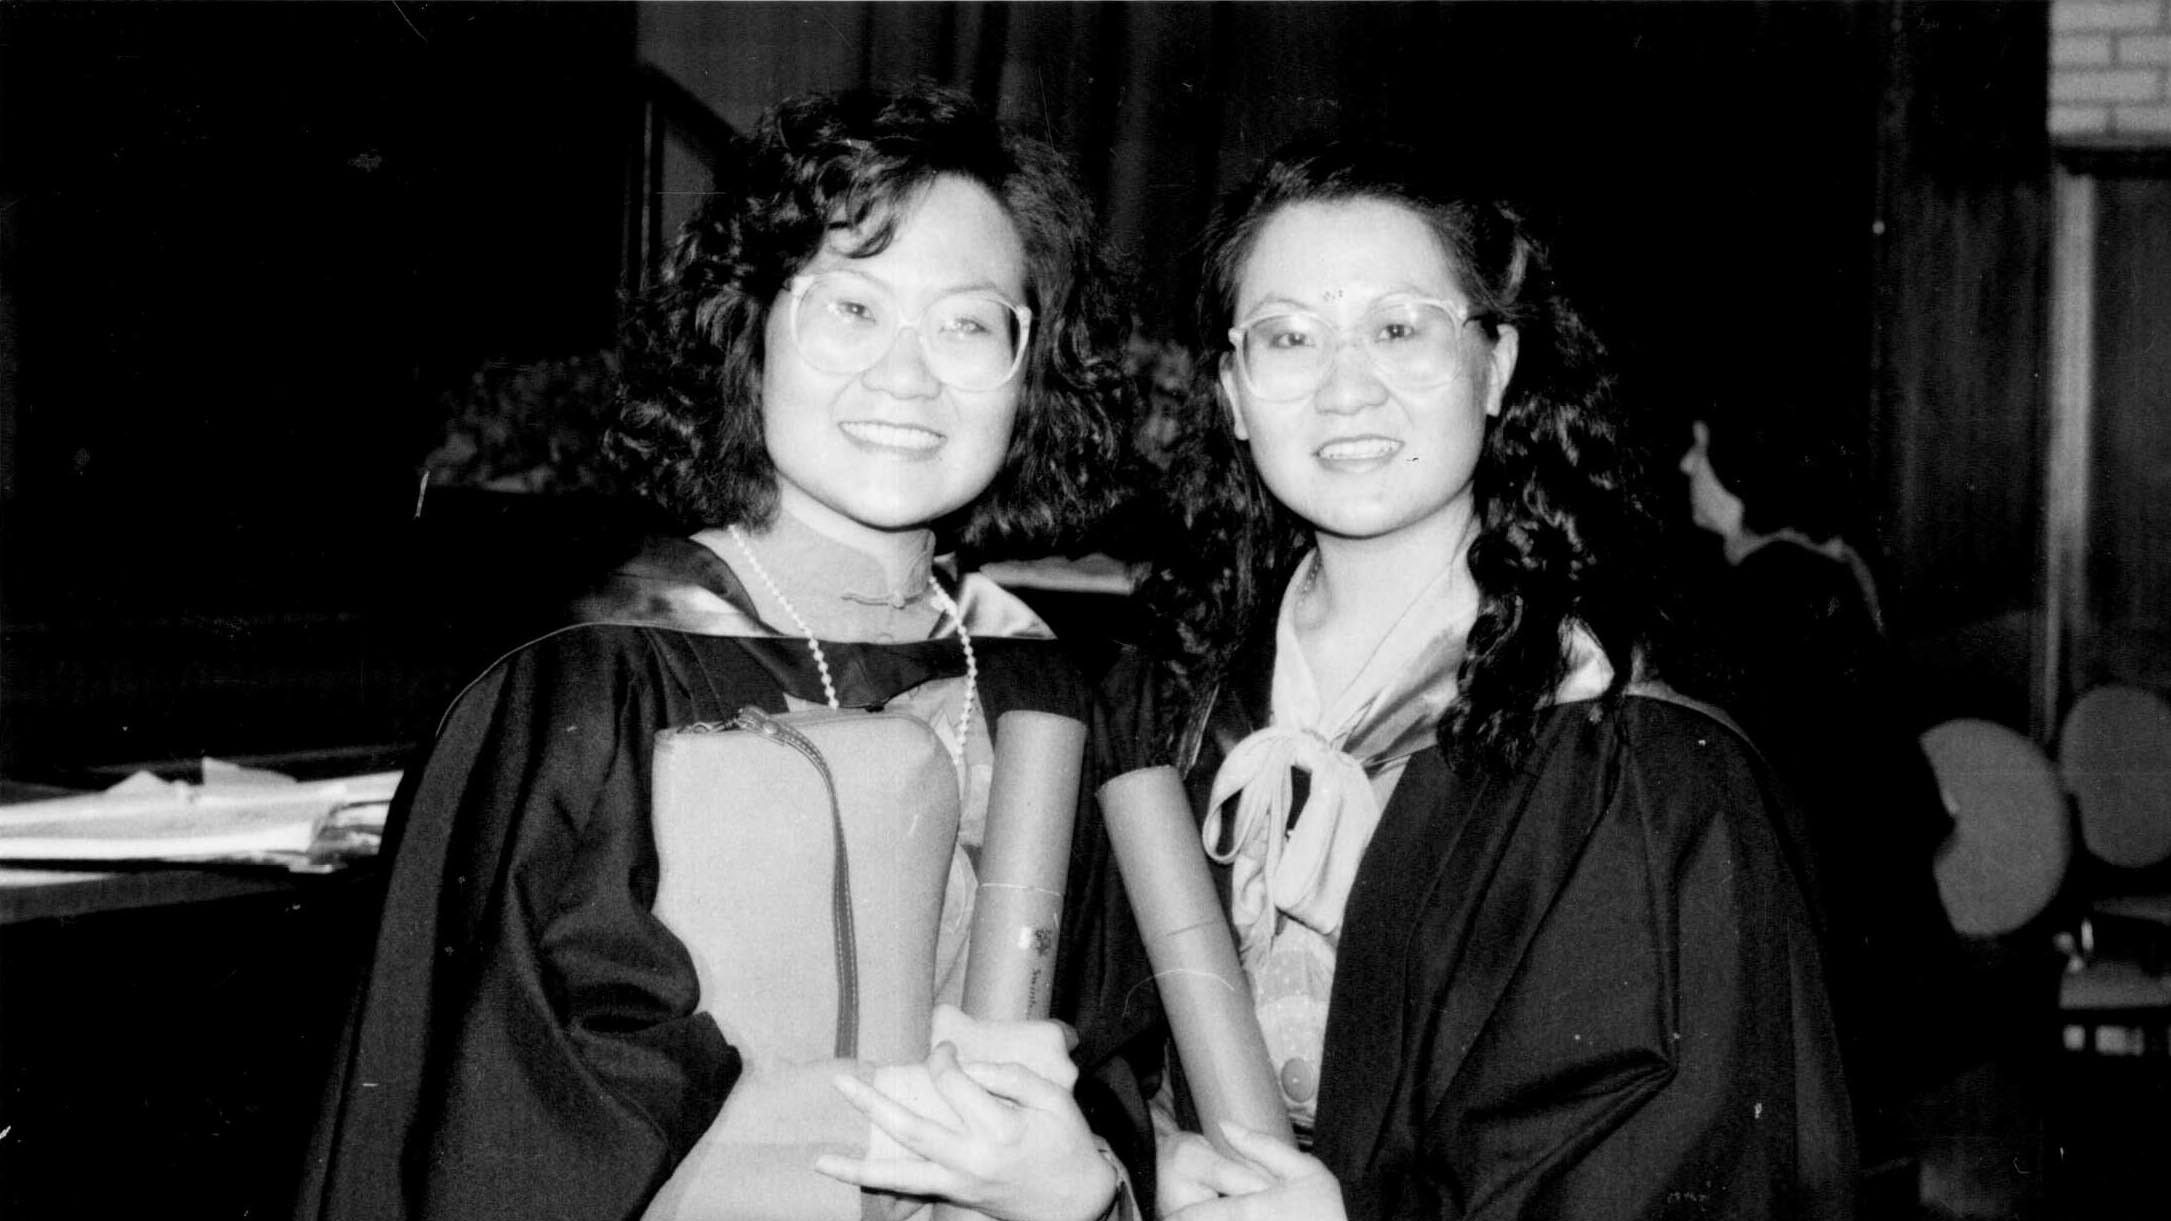 Eileen Ong-Osmond, Bachelor of Mechanical Engineering and Graduate Diploma in Entrepreneurship and Innovation alumna, and Founder of iCare Global Enterprise